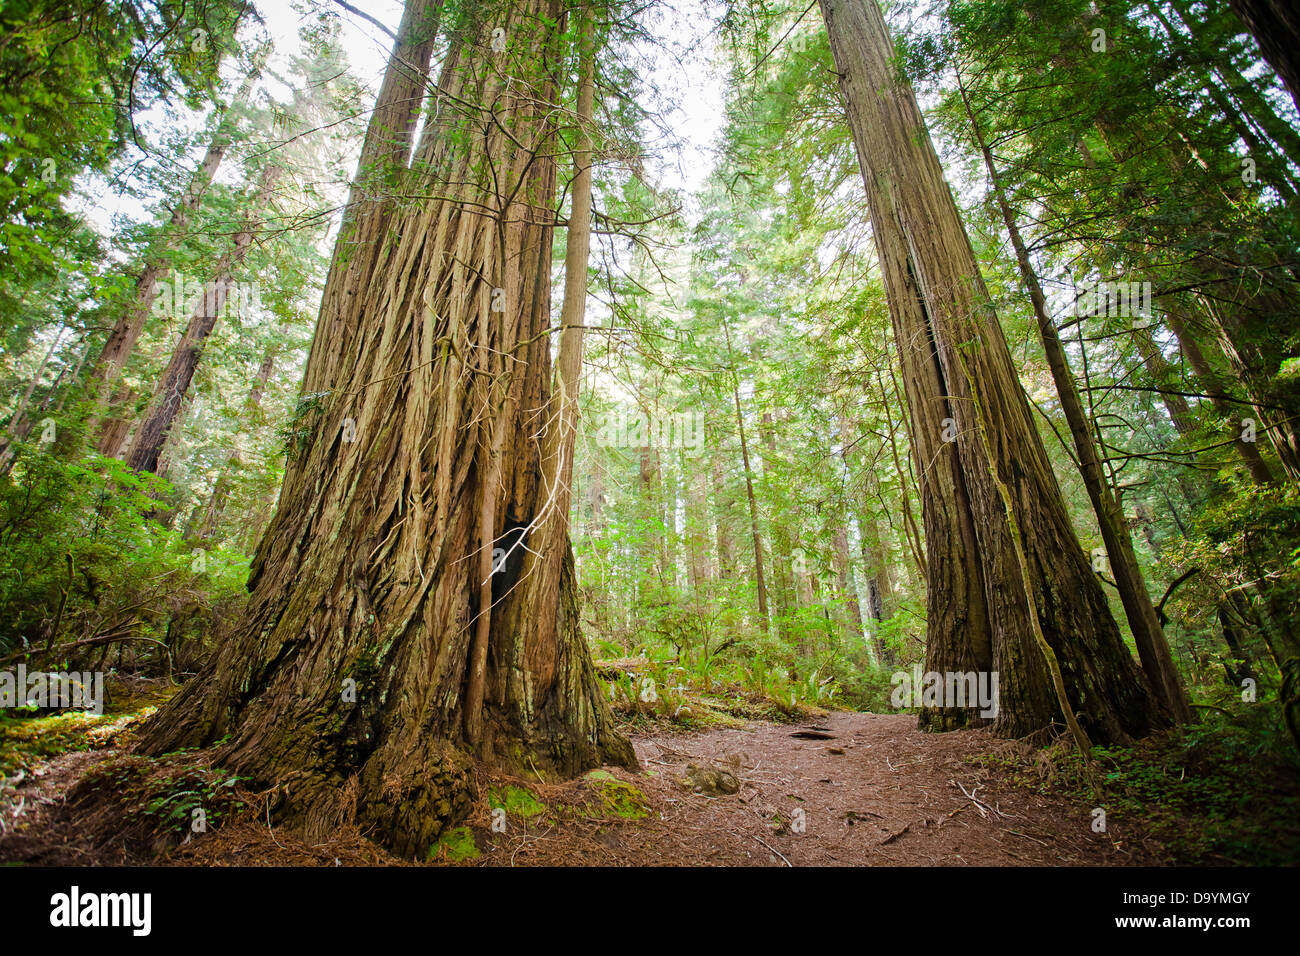 A pathway winds between two giant Redwood trees in California's Redwoods Park. Stock Photo